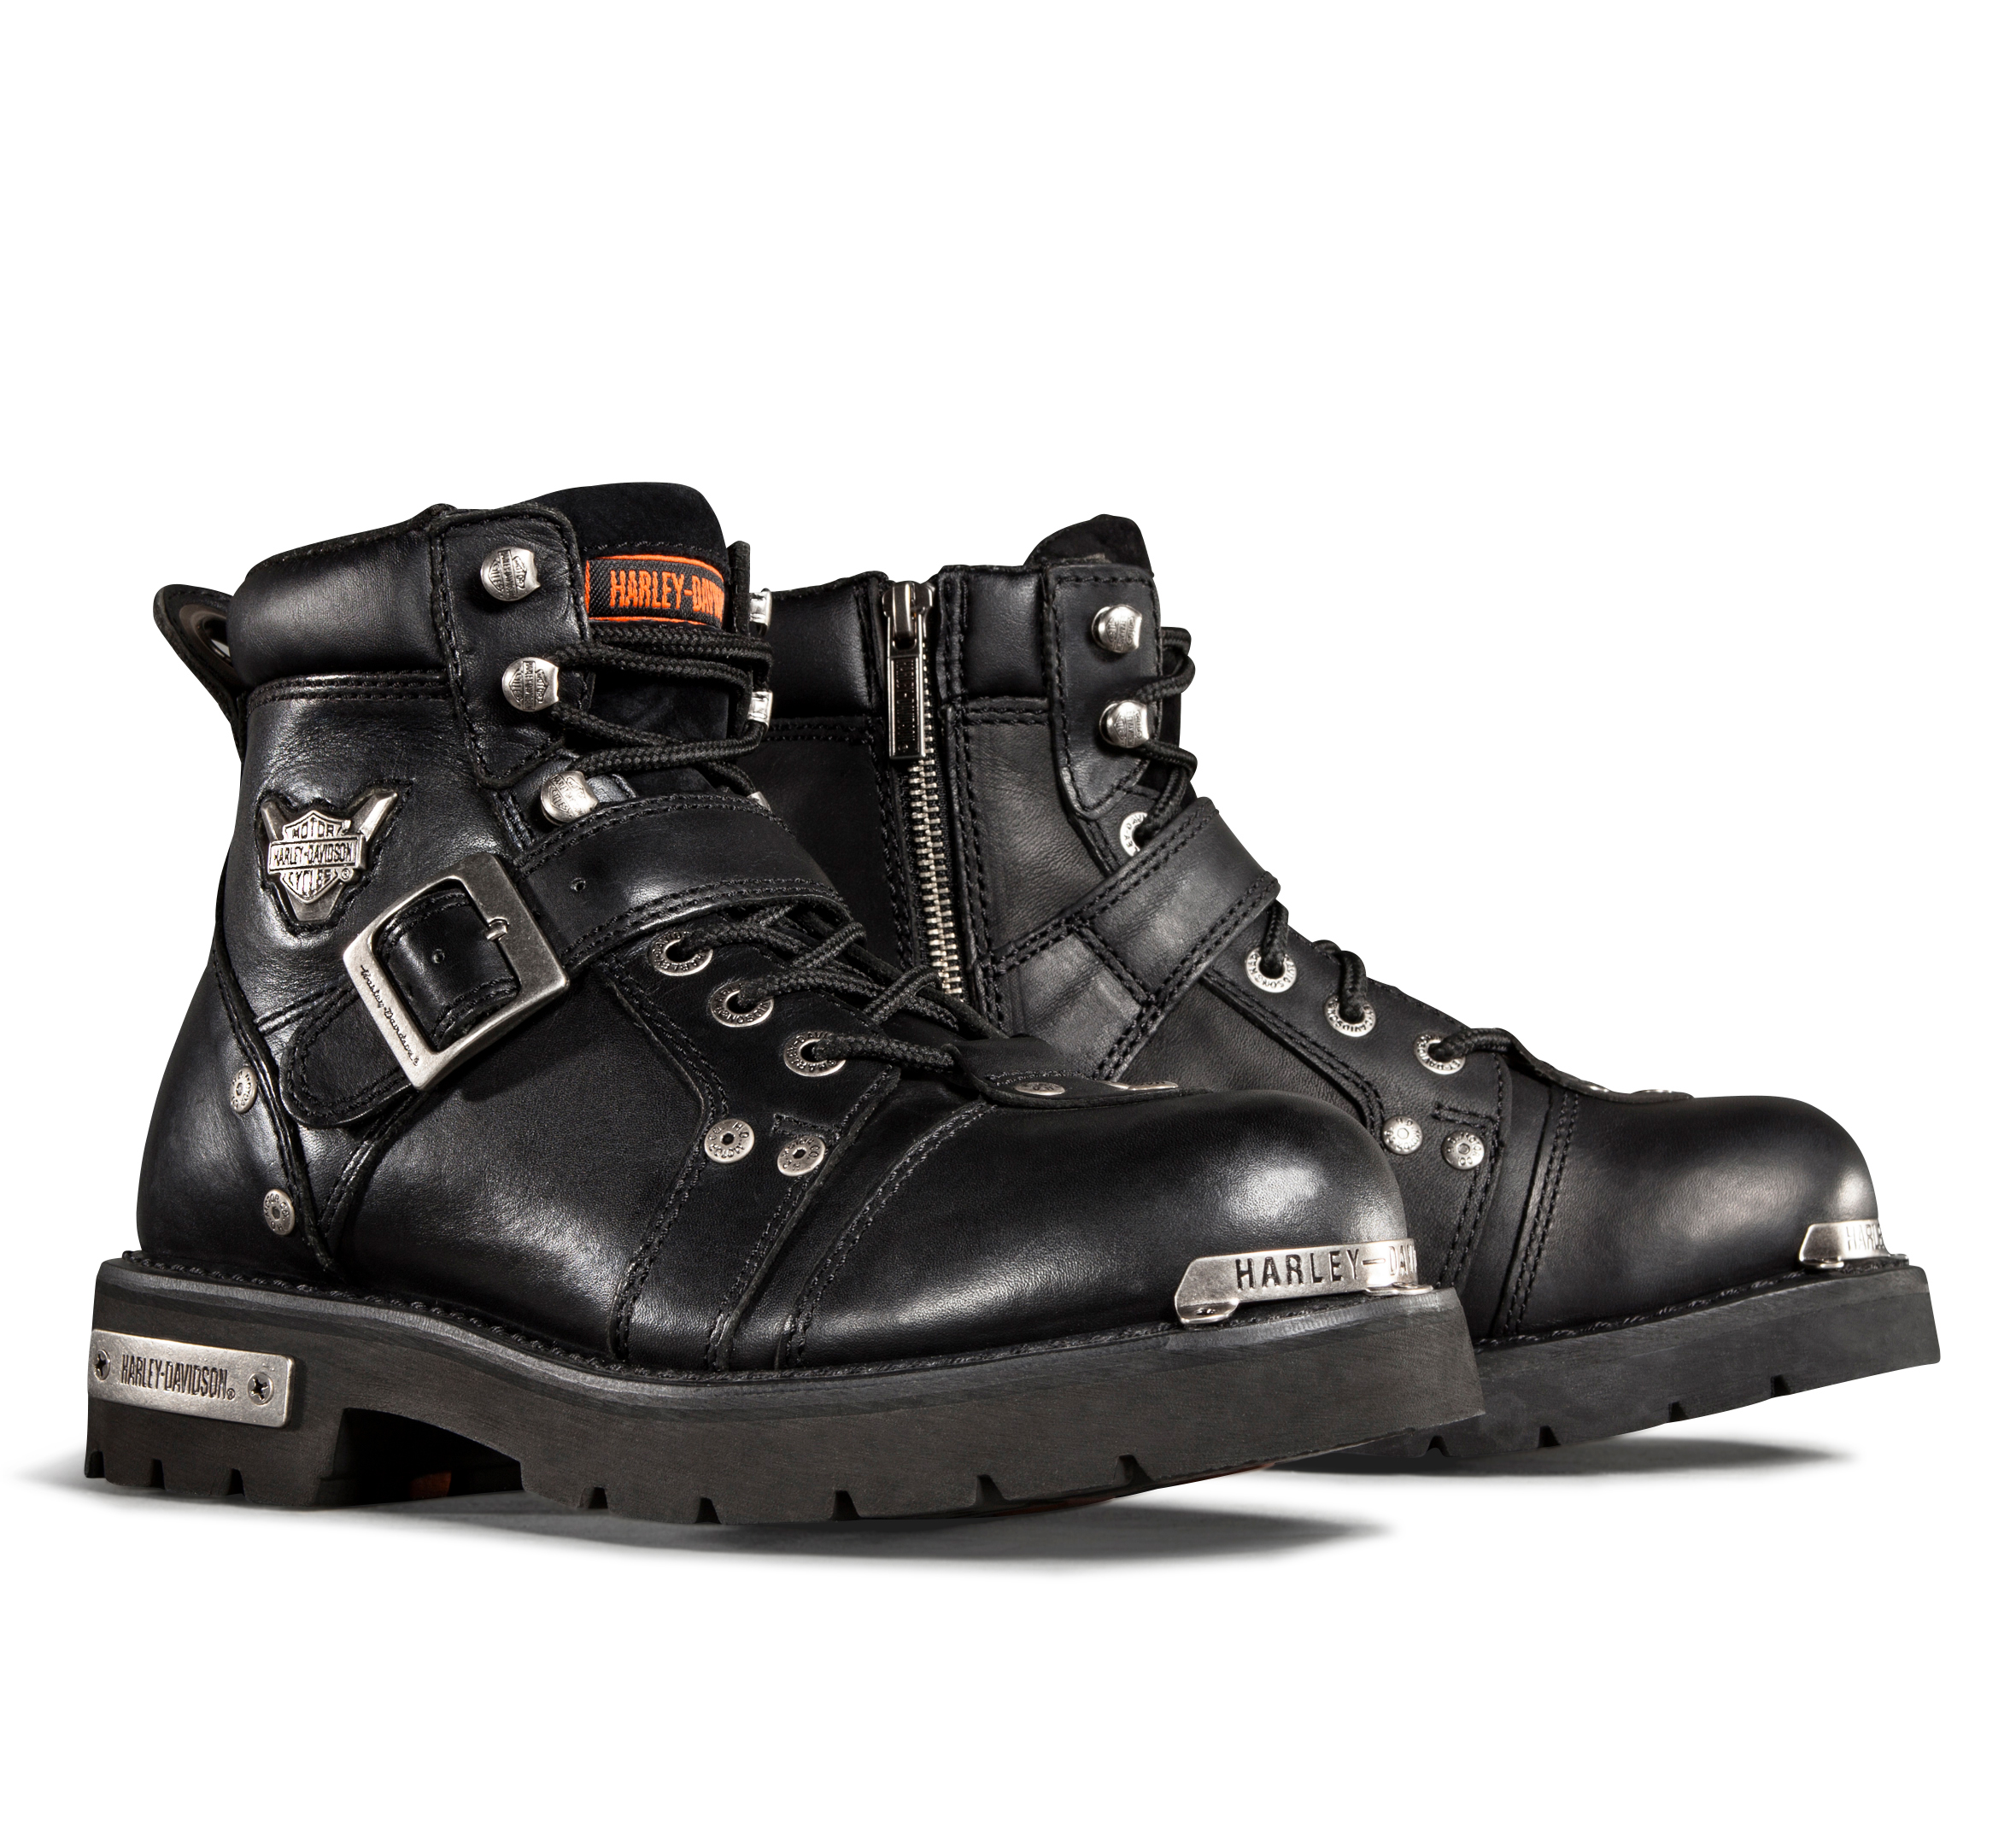 harley davidson steel toe boots with zipper